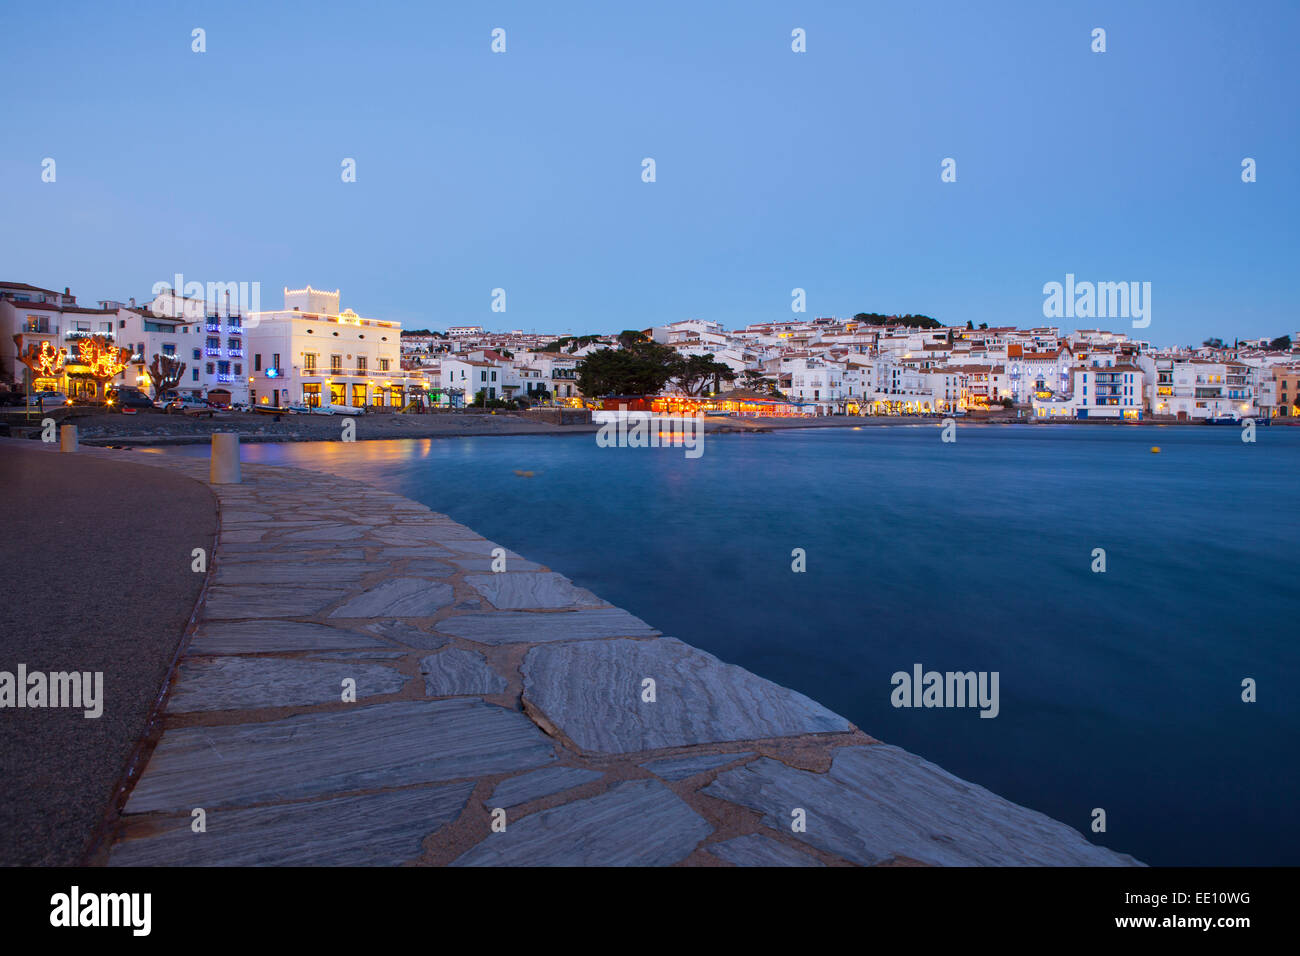 The seafront in Cadaques, Catalonia, Spain. Stock Photo